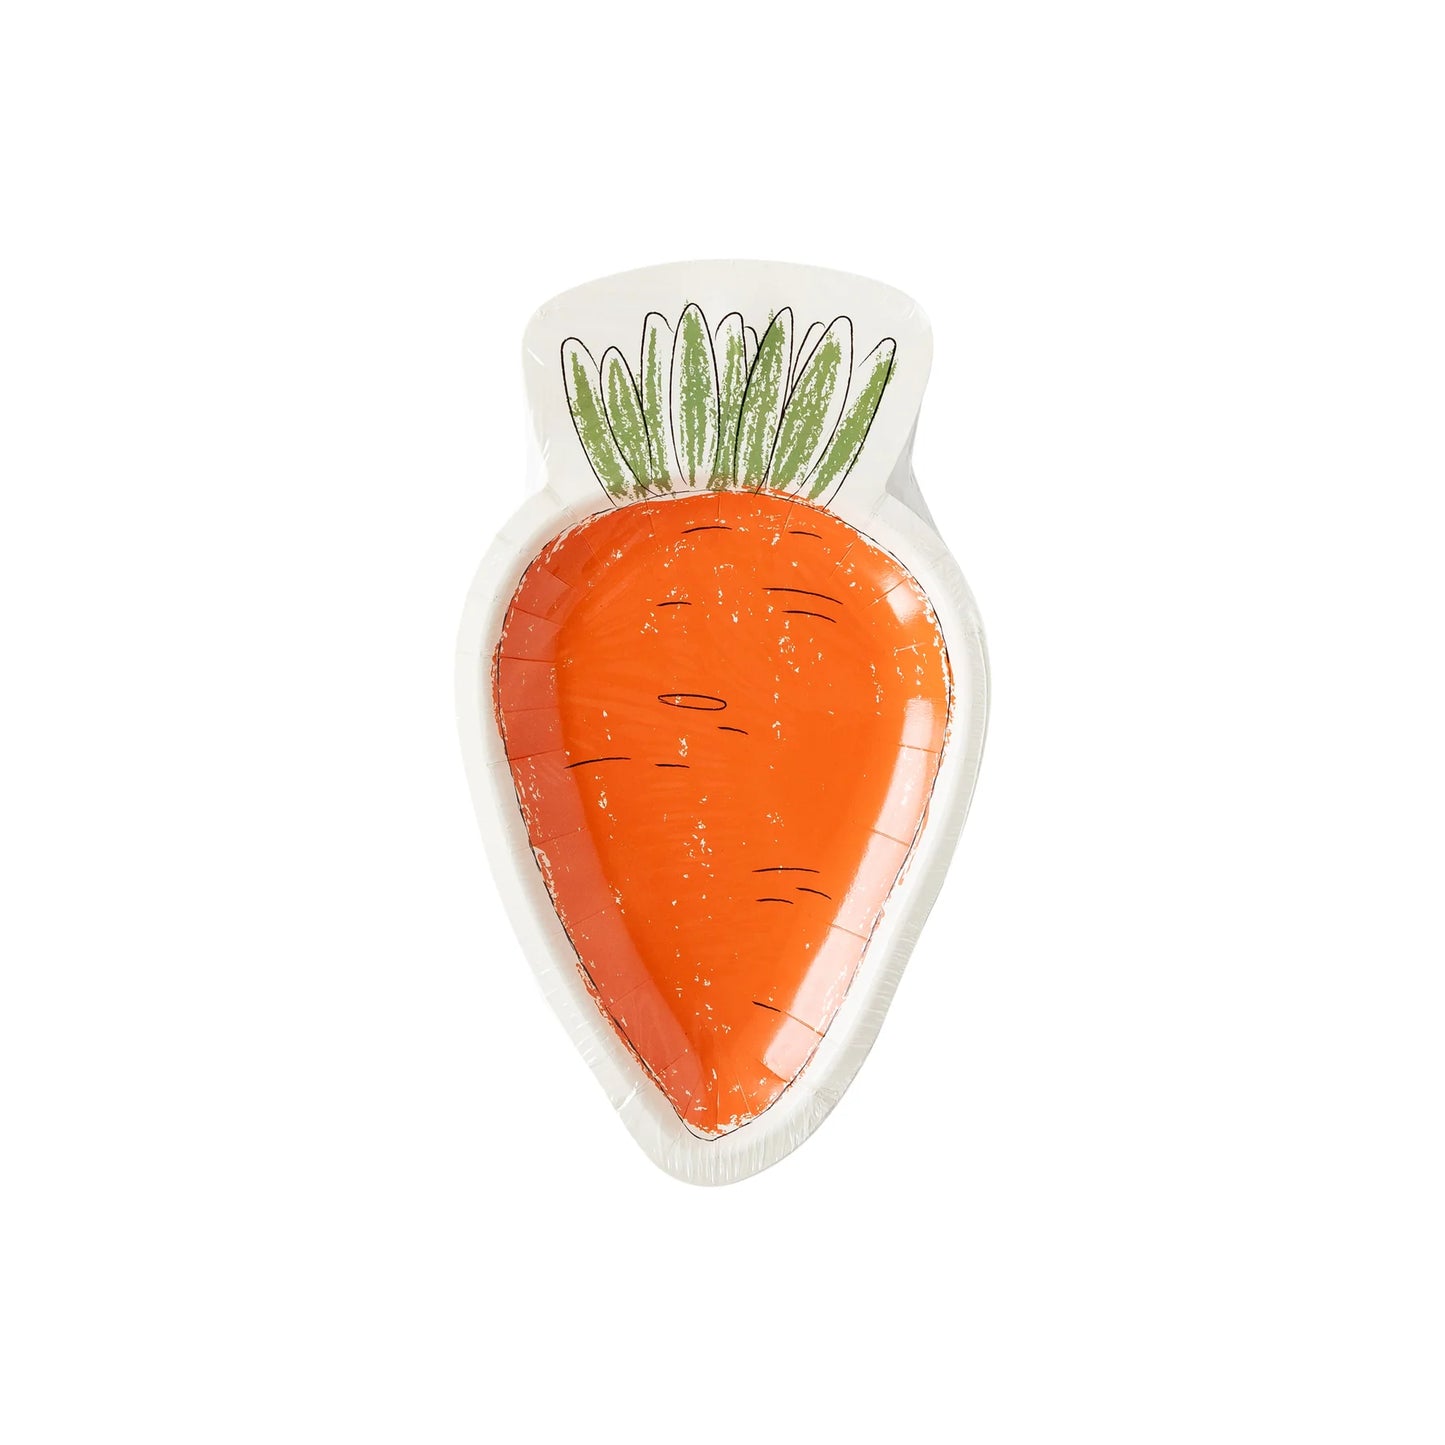 Sketchy Carrot Shaped Plates (8 Count)